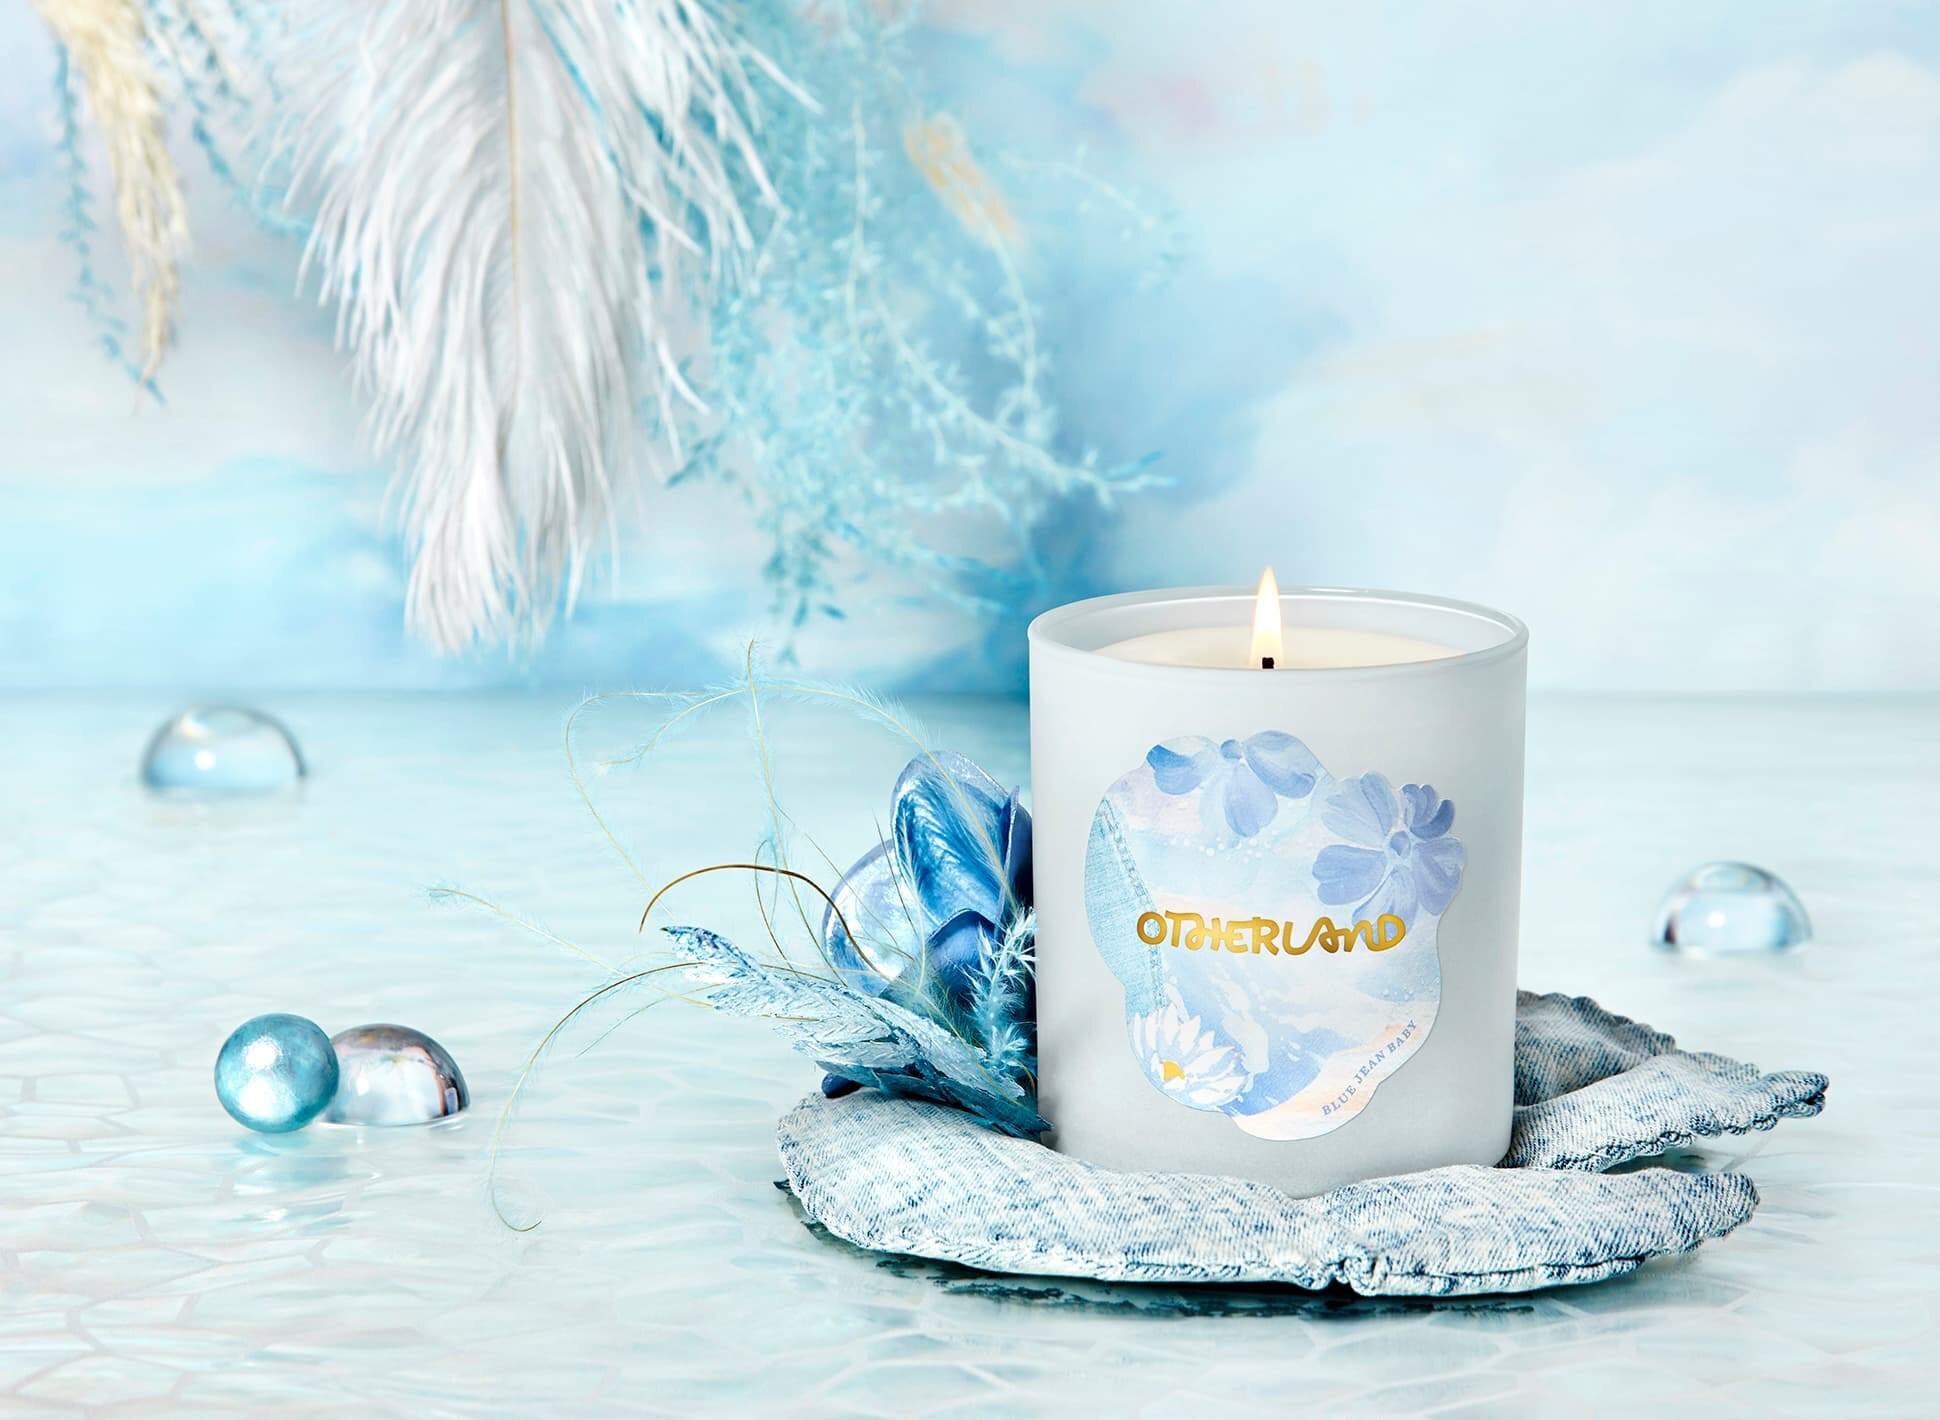 Blue Jean Baby candle by Otherland